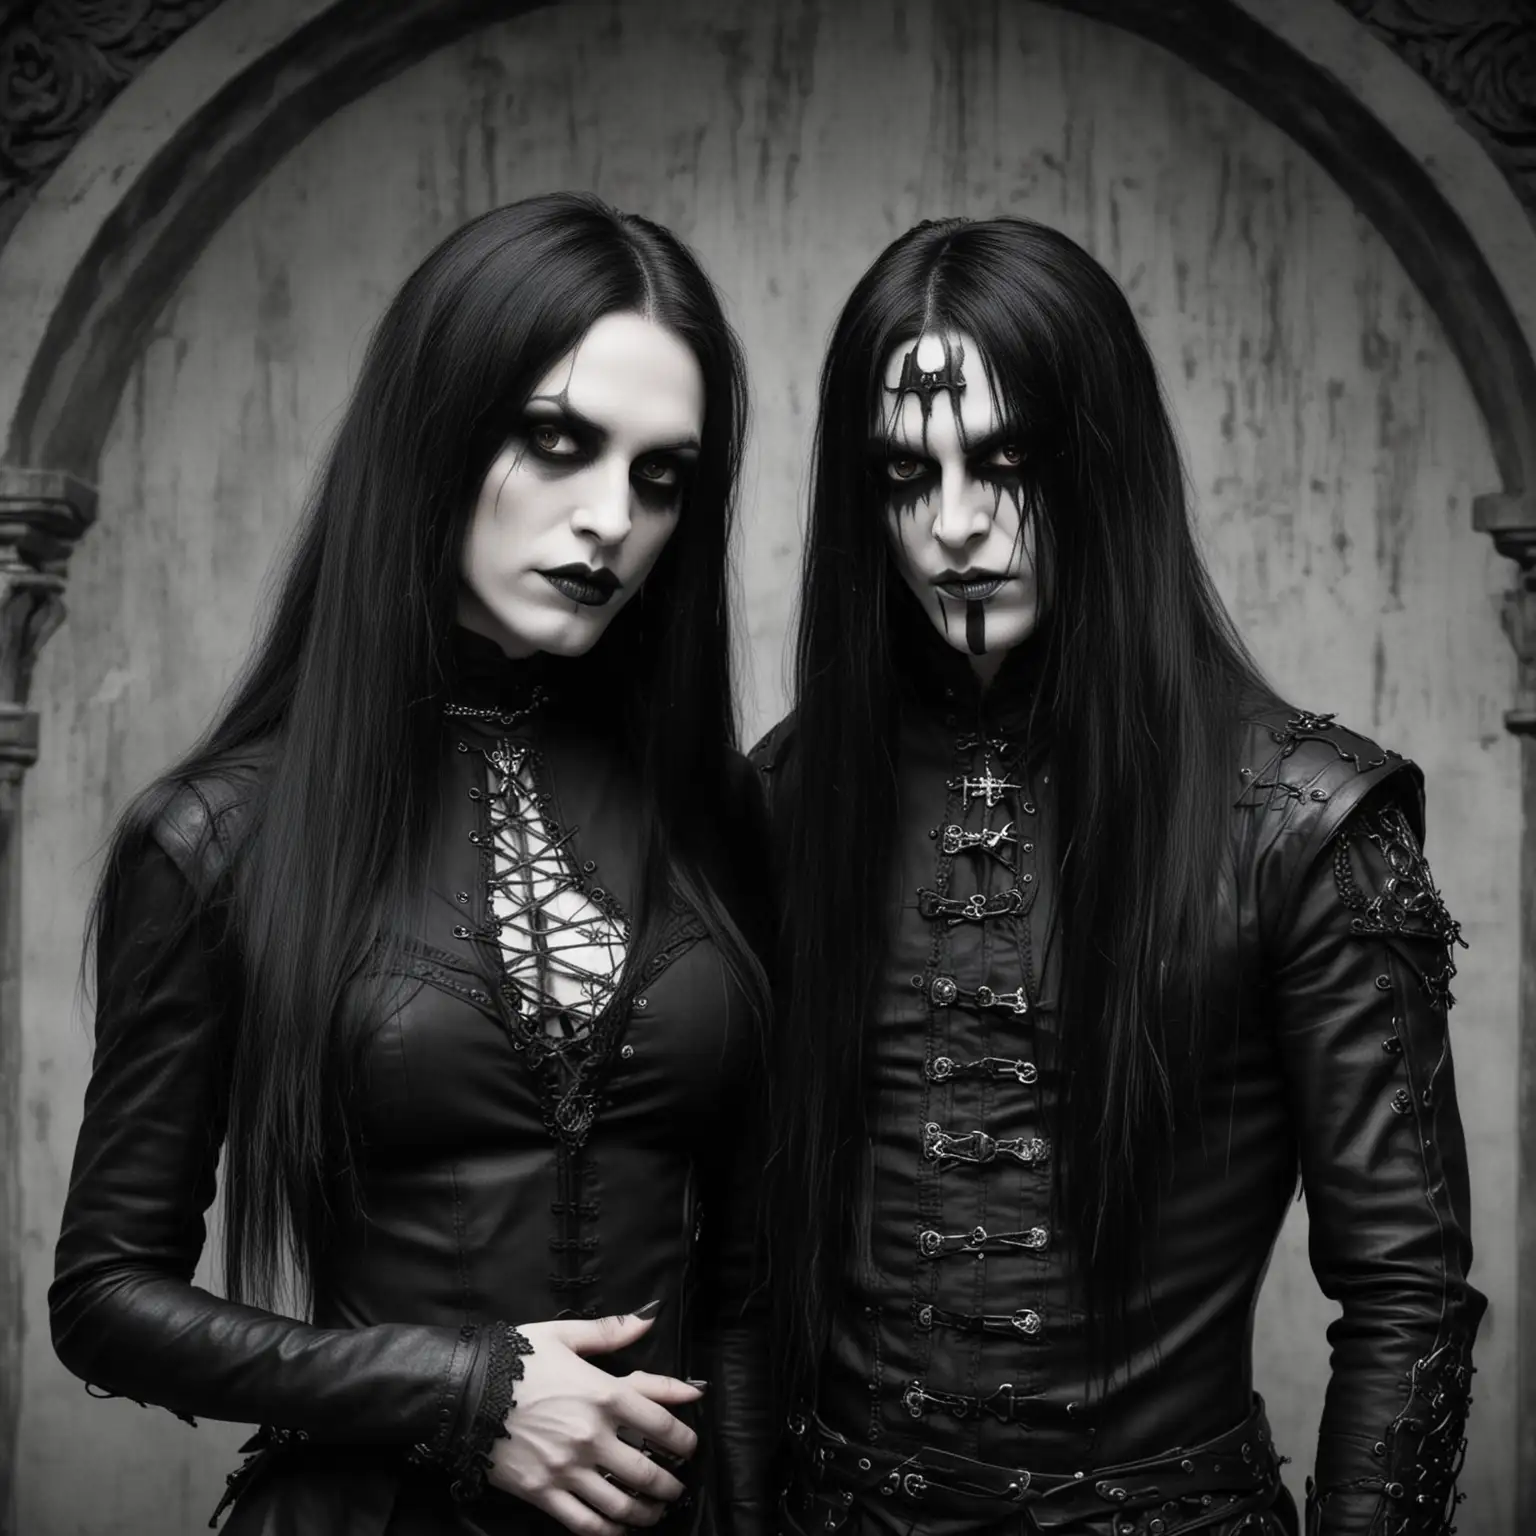 A blackmetalhead man and a gothic woman, both have long black hair. The image should be inspire by 50 Shades of gray and BDSM Aesthetics.